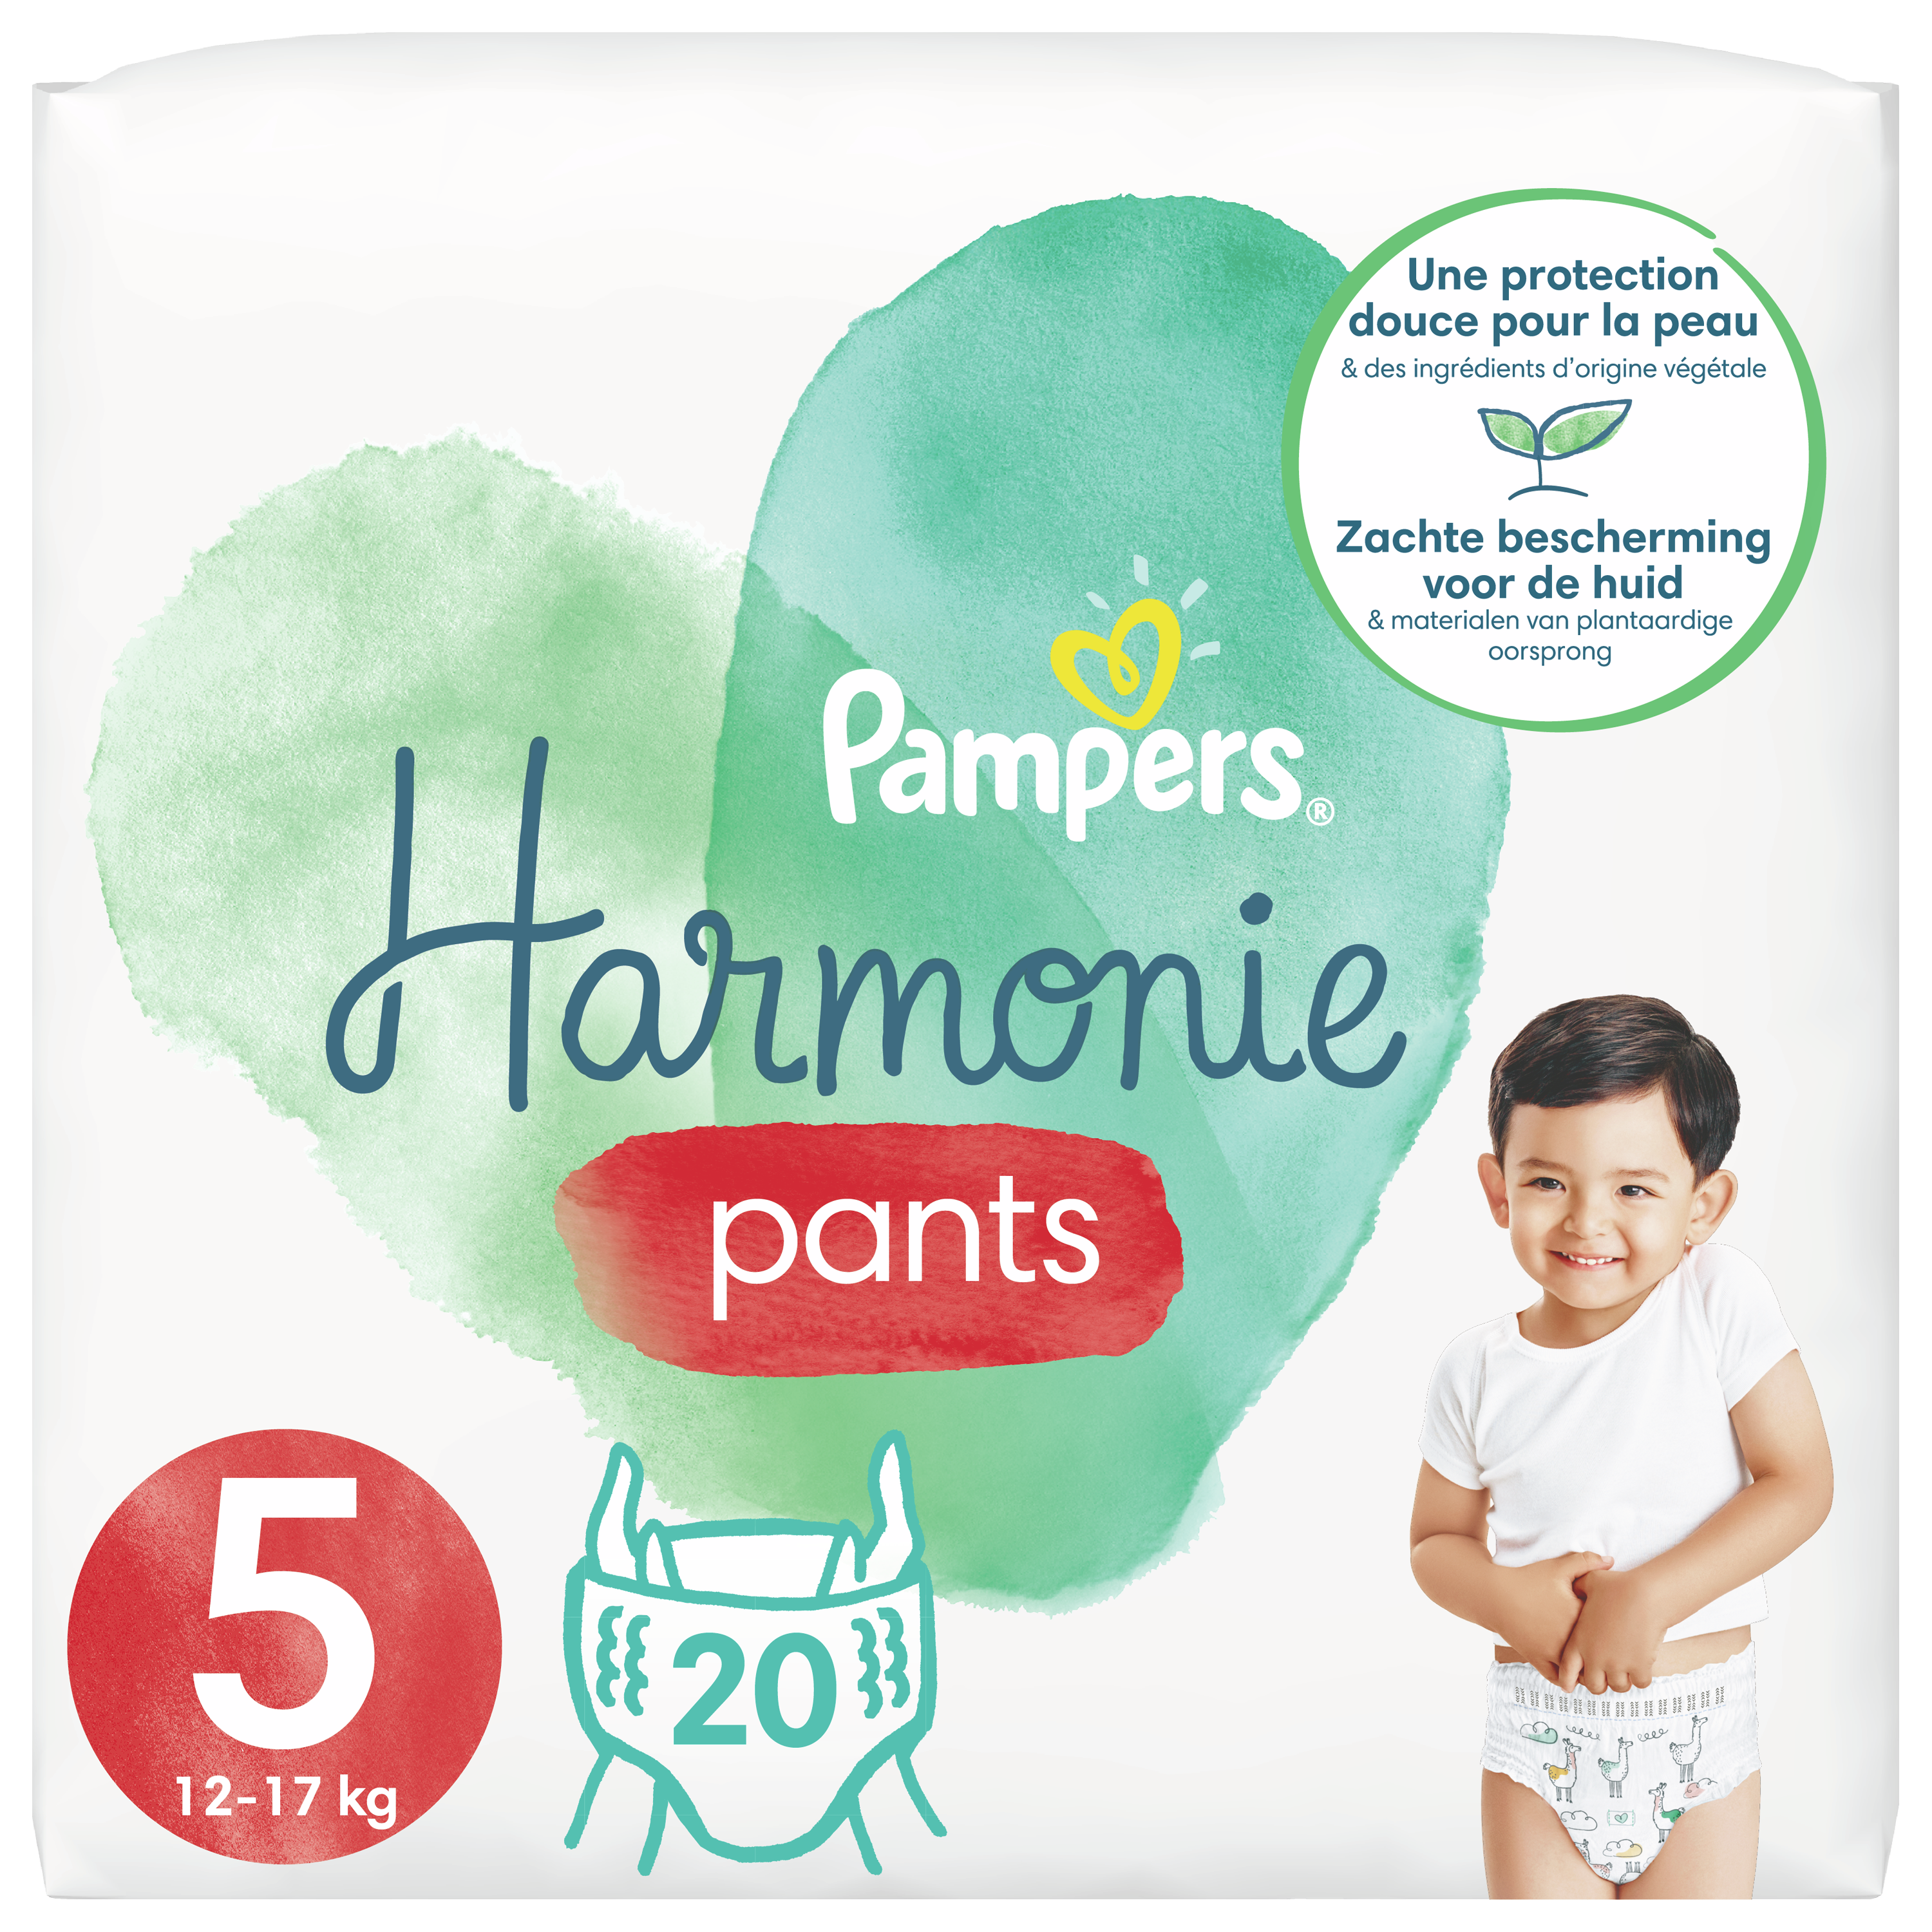 Lot de 2 cartons couches Pampers Harmonie Pants taille 5 124 couches -  Pampers